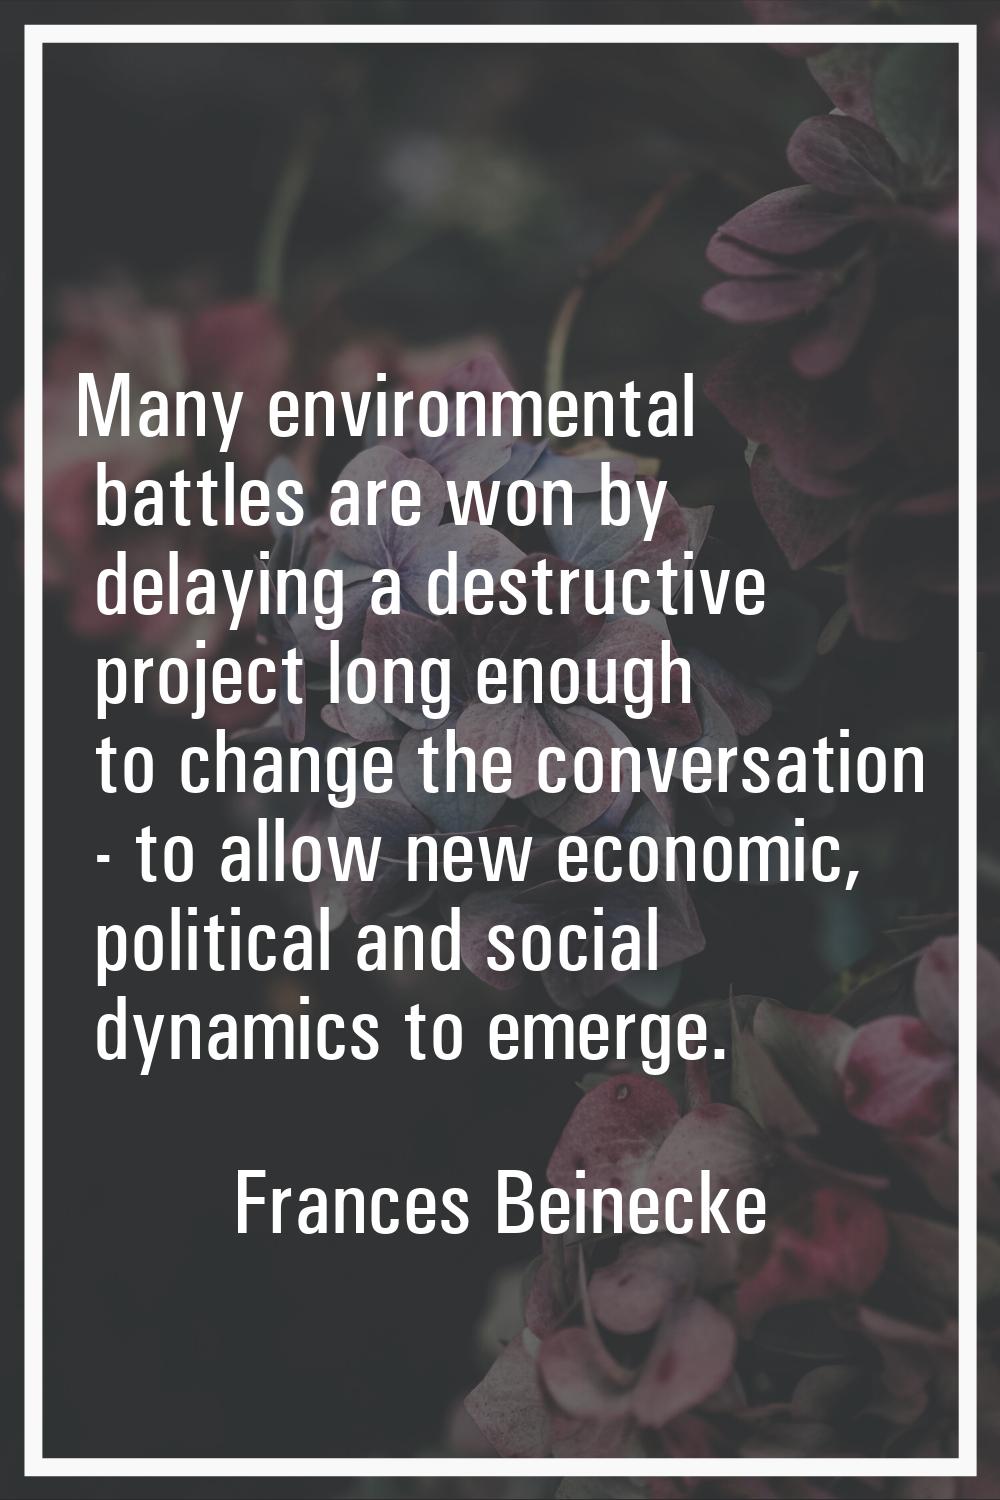 Many environmental battles are won by delaying a destructive project long enough to change the conv